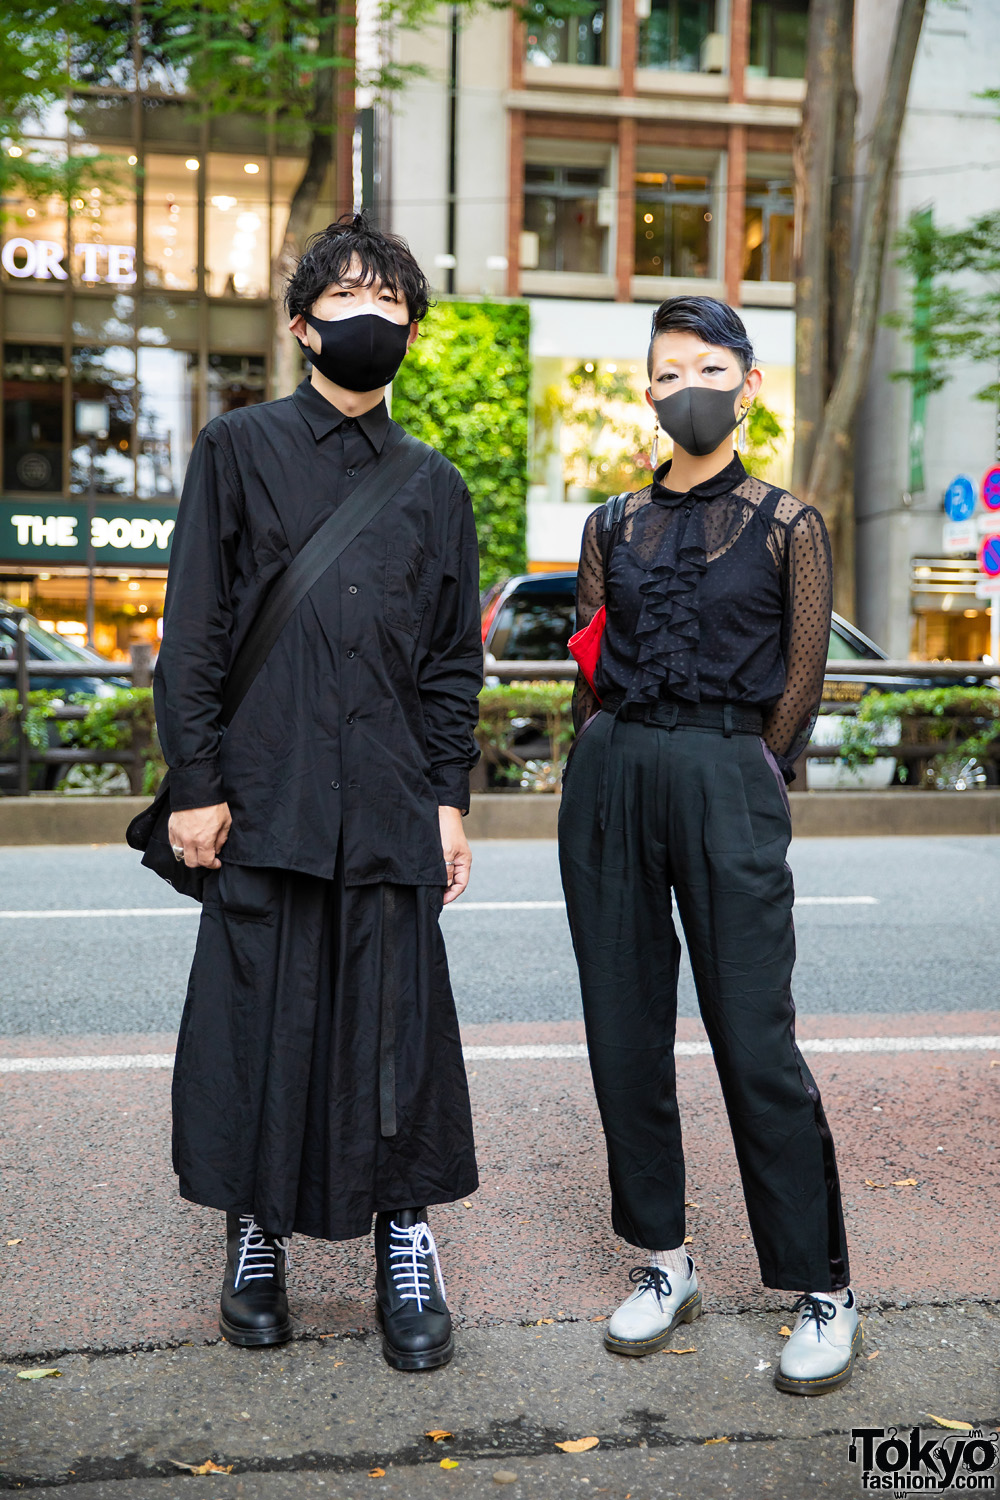 Japanese Duo All Black Street Styles w/ Undercut Hair, B Yohji Yamamoto, Sheer Polka Dot Blouse, Belted Trousers, Ground Y, Vivienne Westwood, Crazy Pig Designs, Chrome Hearts & Dr. Martens x Sex Pistols 1460 No Future Slogan Boots